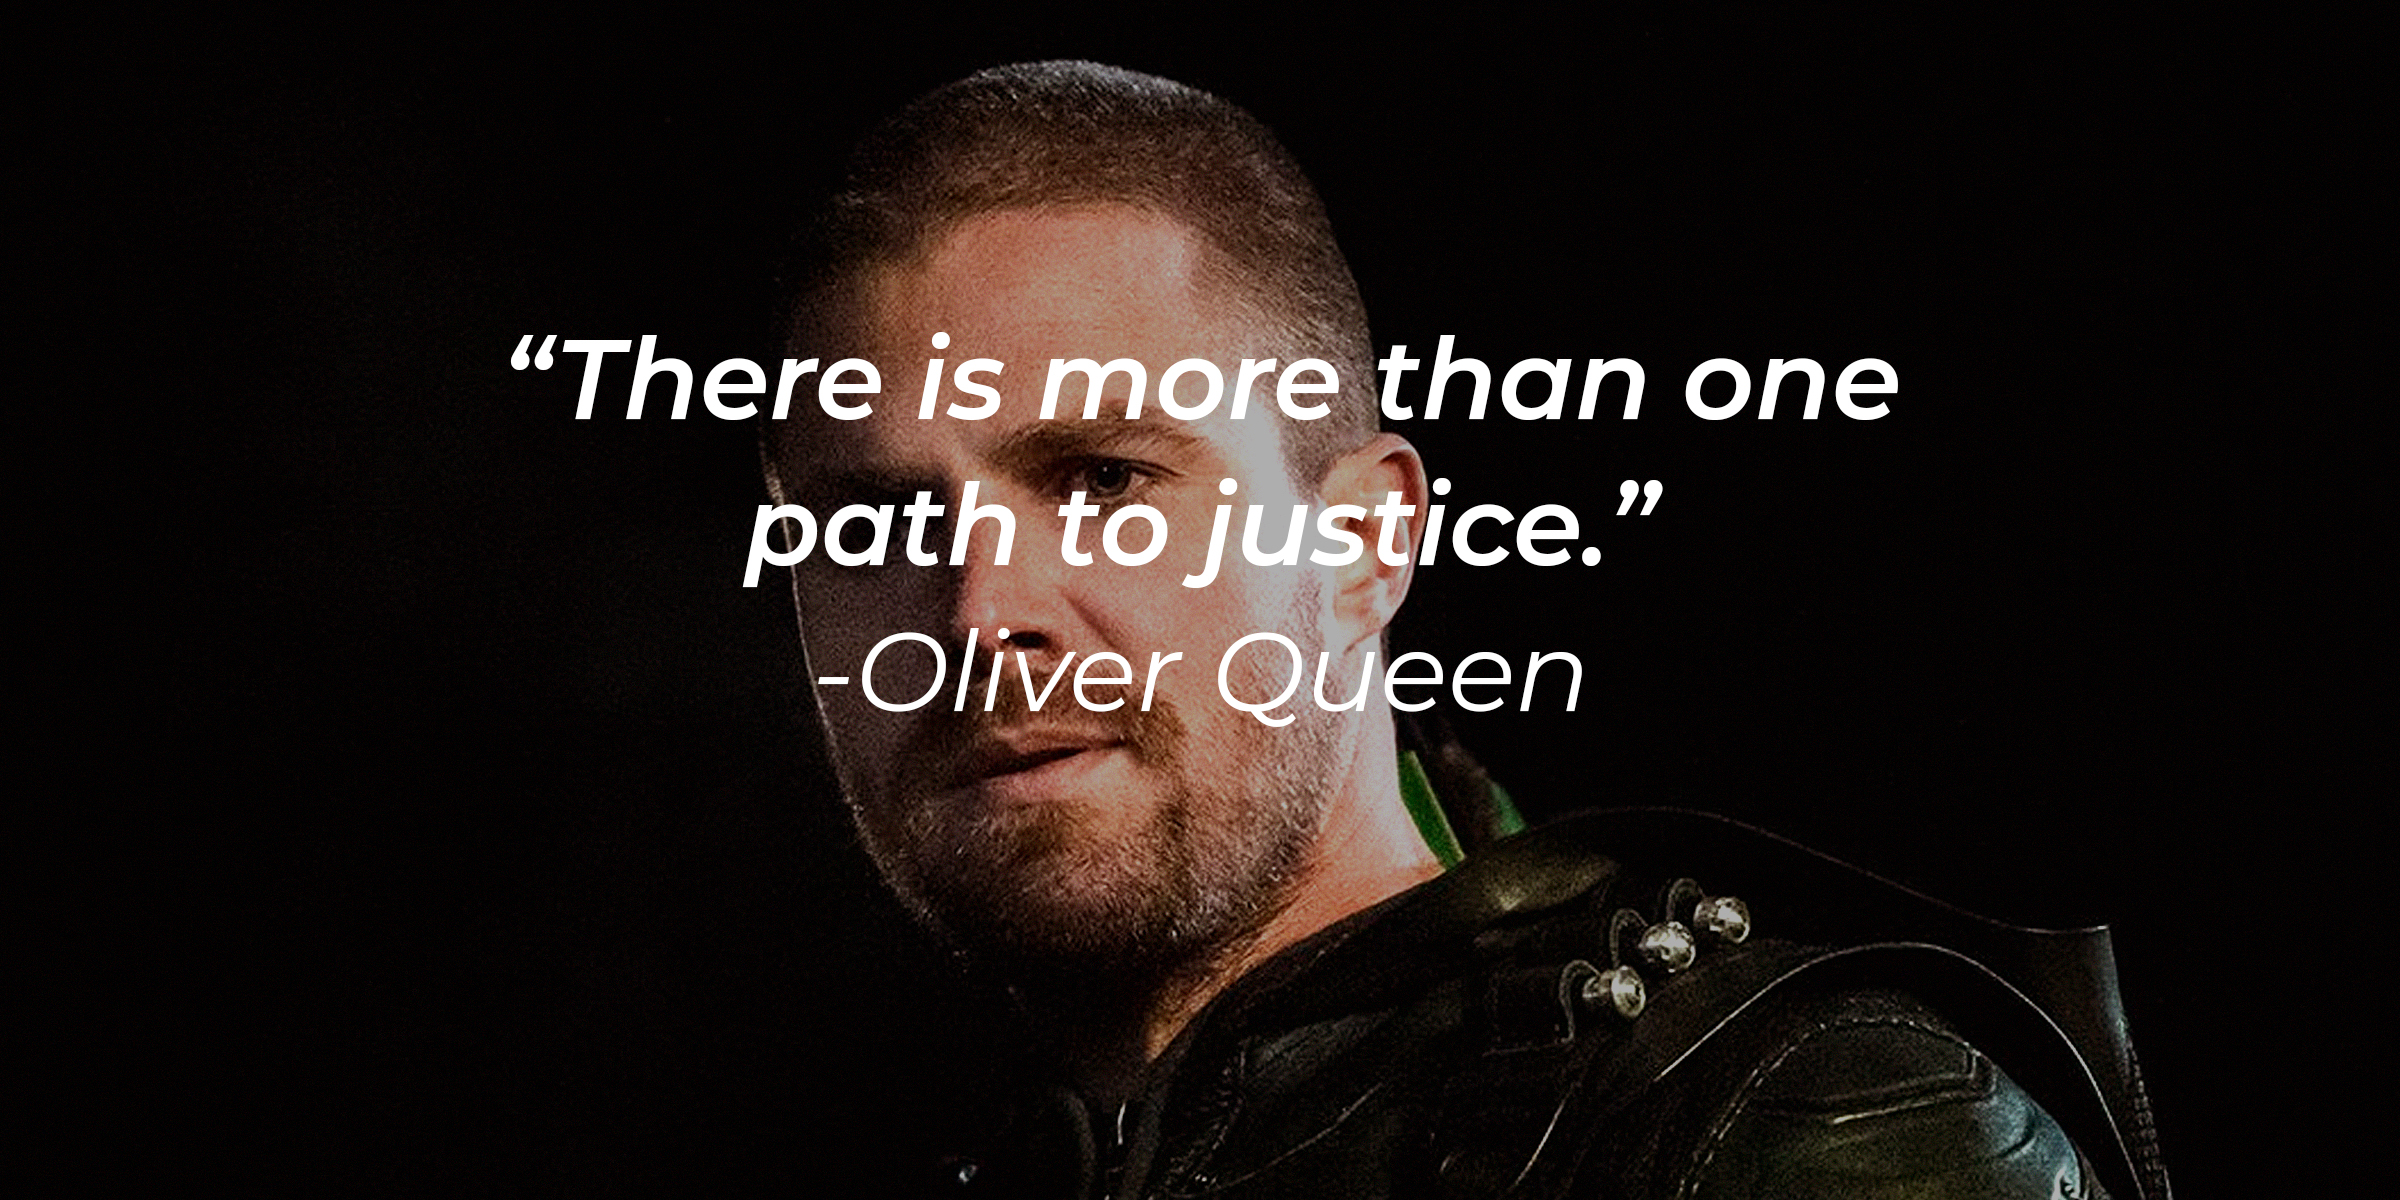 An image of Oliver Queen with his quote: "There is more than one path to justice.” | Source: facebook.com/CWArrow